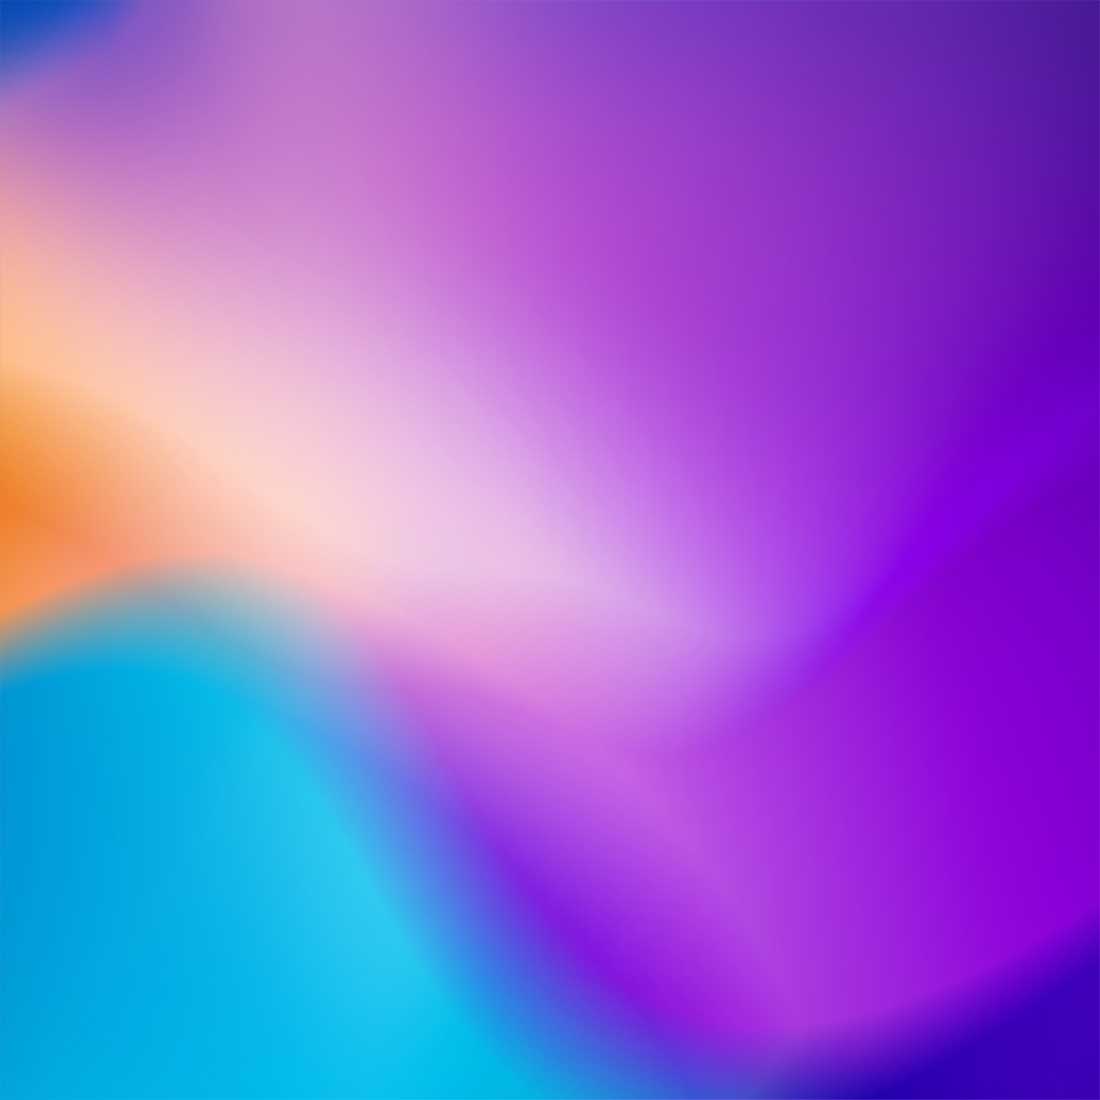 Abstract Background Gradient Luxury Vivid Blurred Colorful Texture Wallpaper Photo cover image.